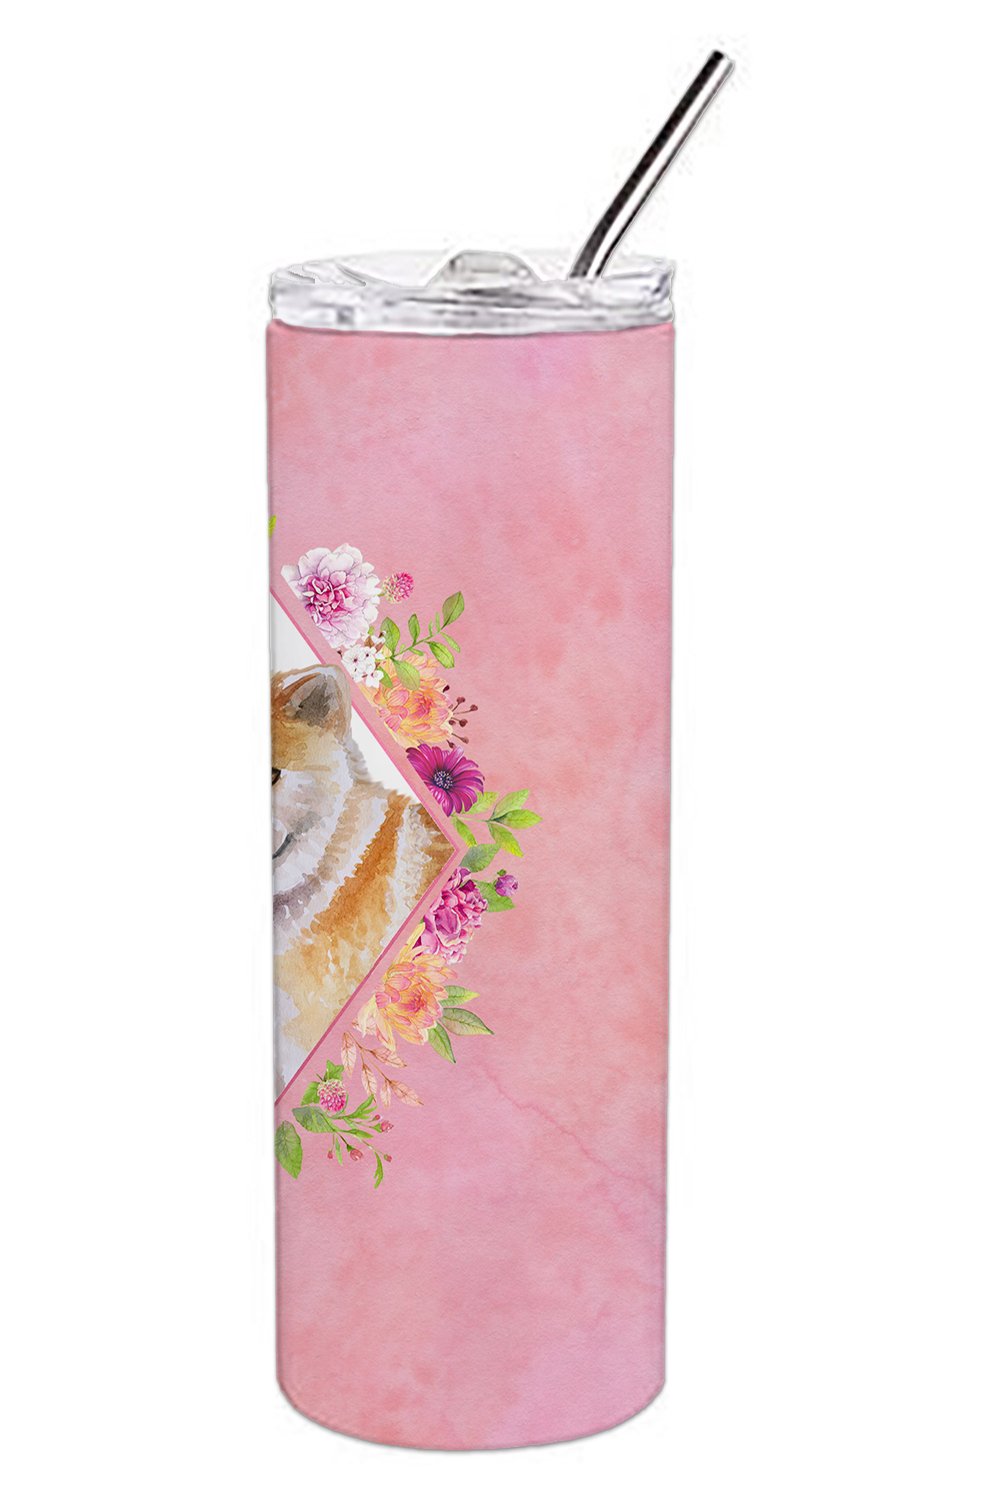 Shiba Inu Pink Flowers Double Walled Stainless Steel 20 oz Skinny Tumbler CK4183TBL20 by Caroline's Treasures